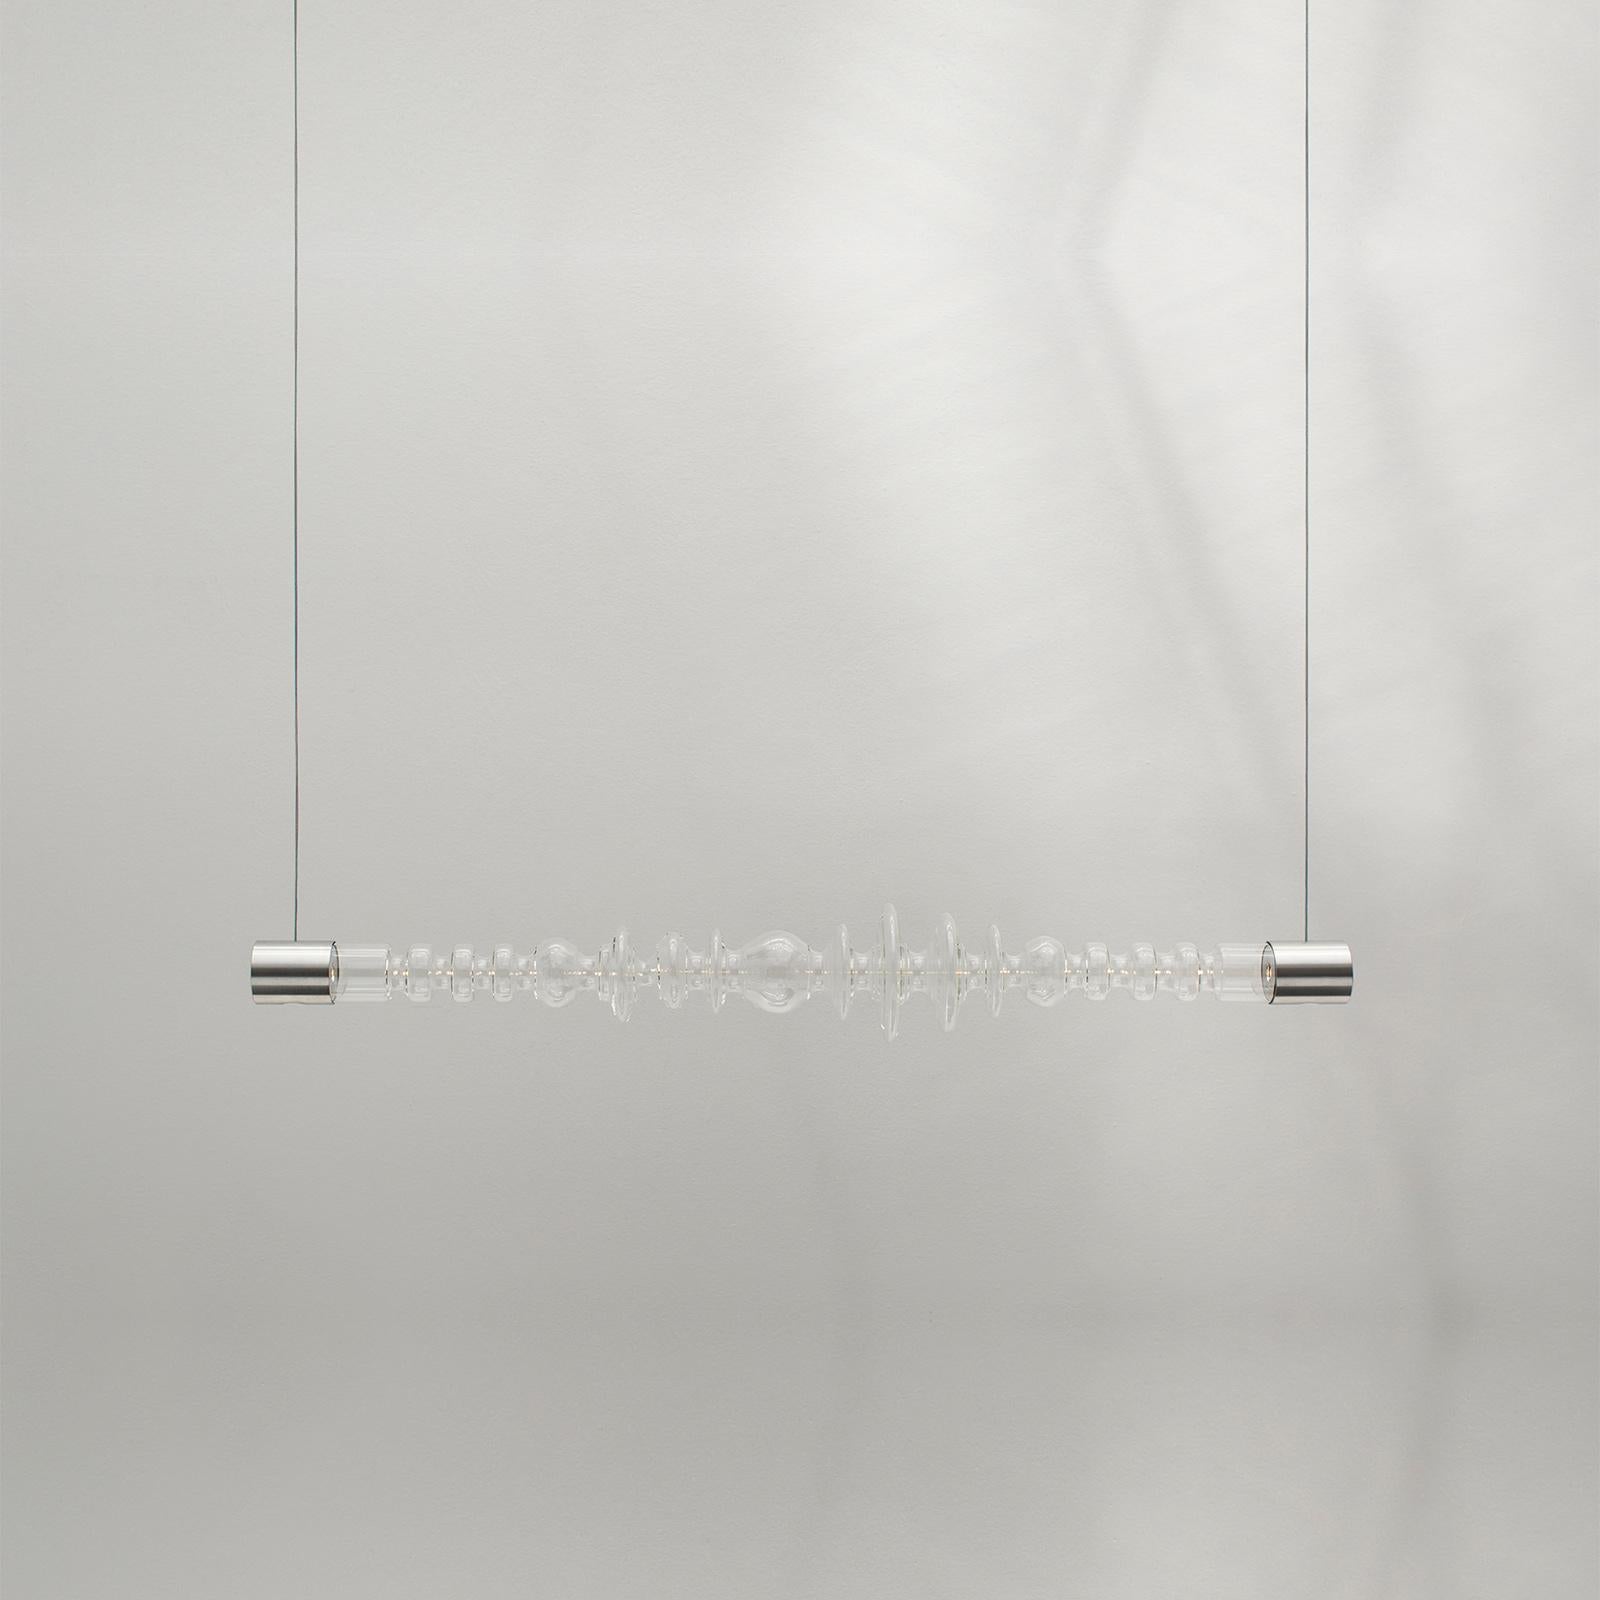 The Filamento light was designed as a modular system. Each of the 1.26-metre-long lights can be attached to one another. The studio attached four Filamento pieces together to form a five-metre-long installation for Rossana Orlandi's space. The light